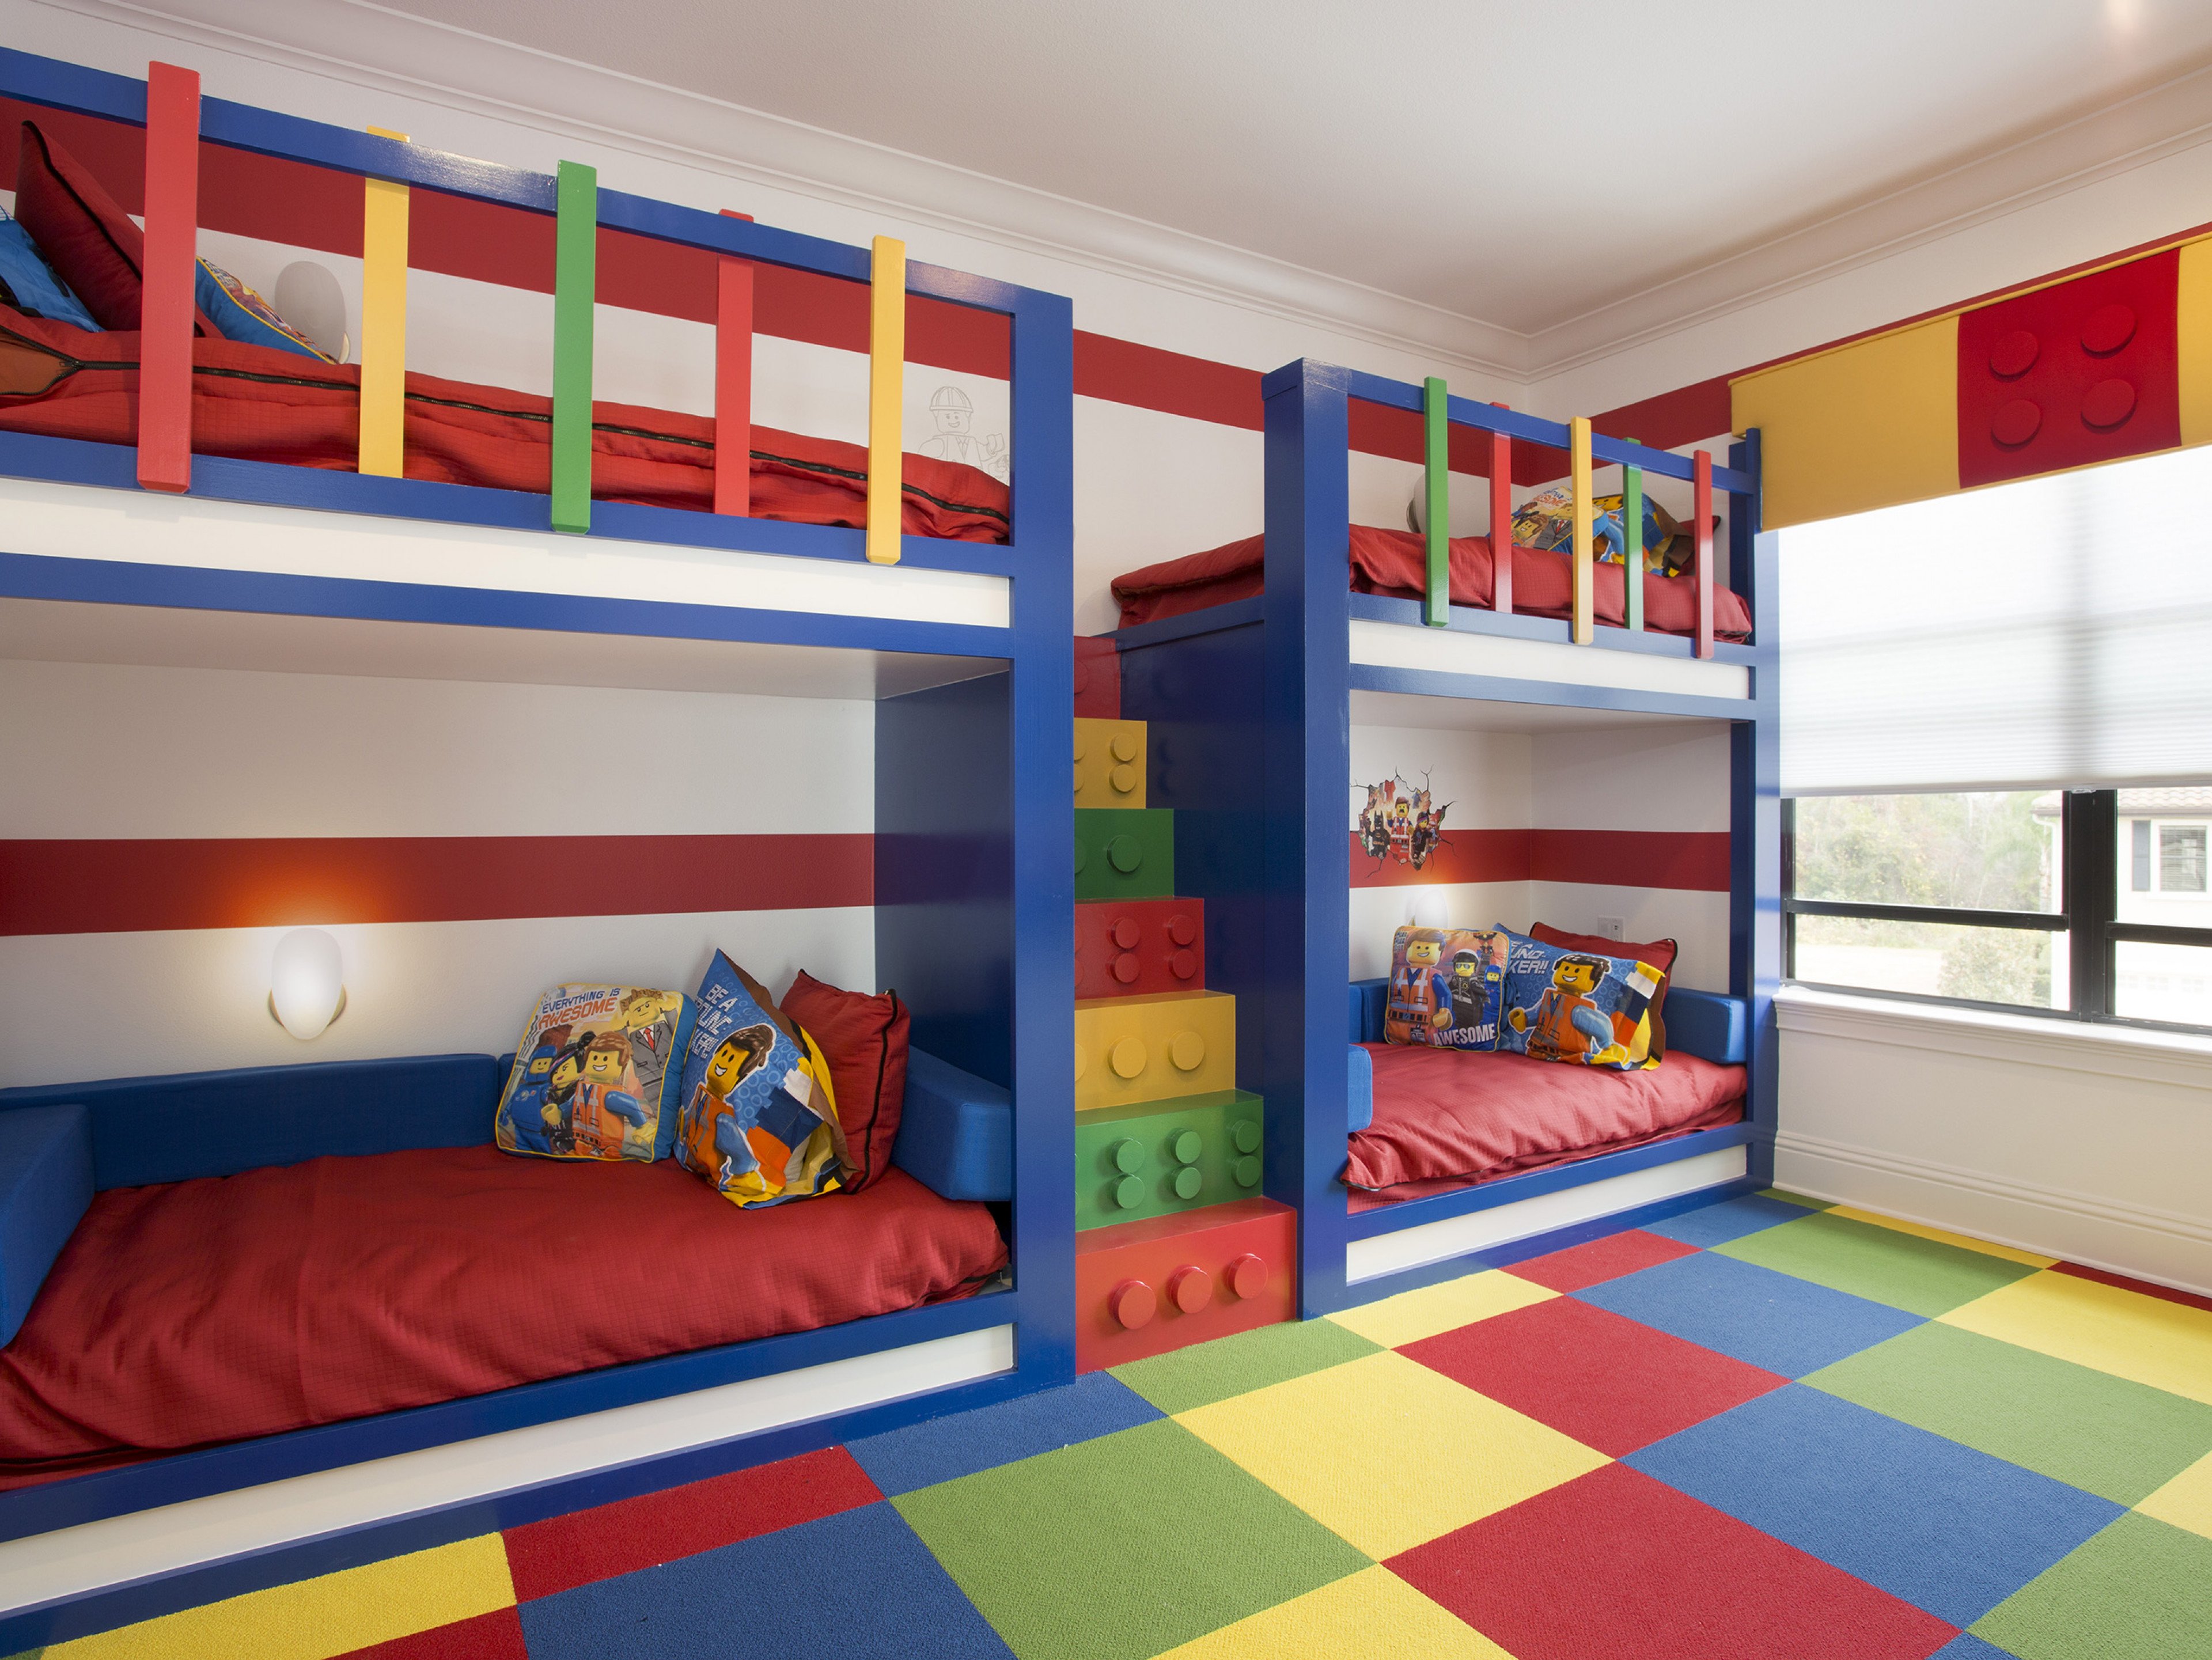  Orlando homes with Legoland-themed rooms - Reunion Resort 3500